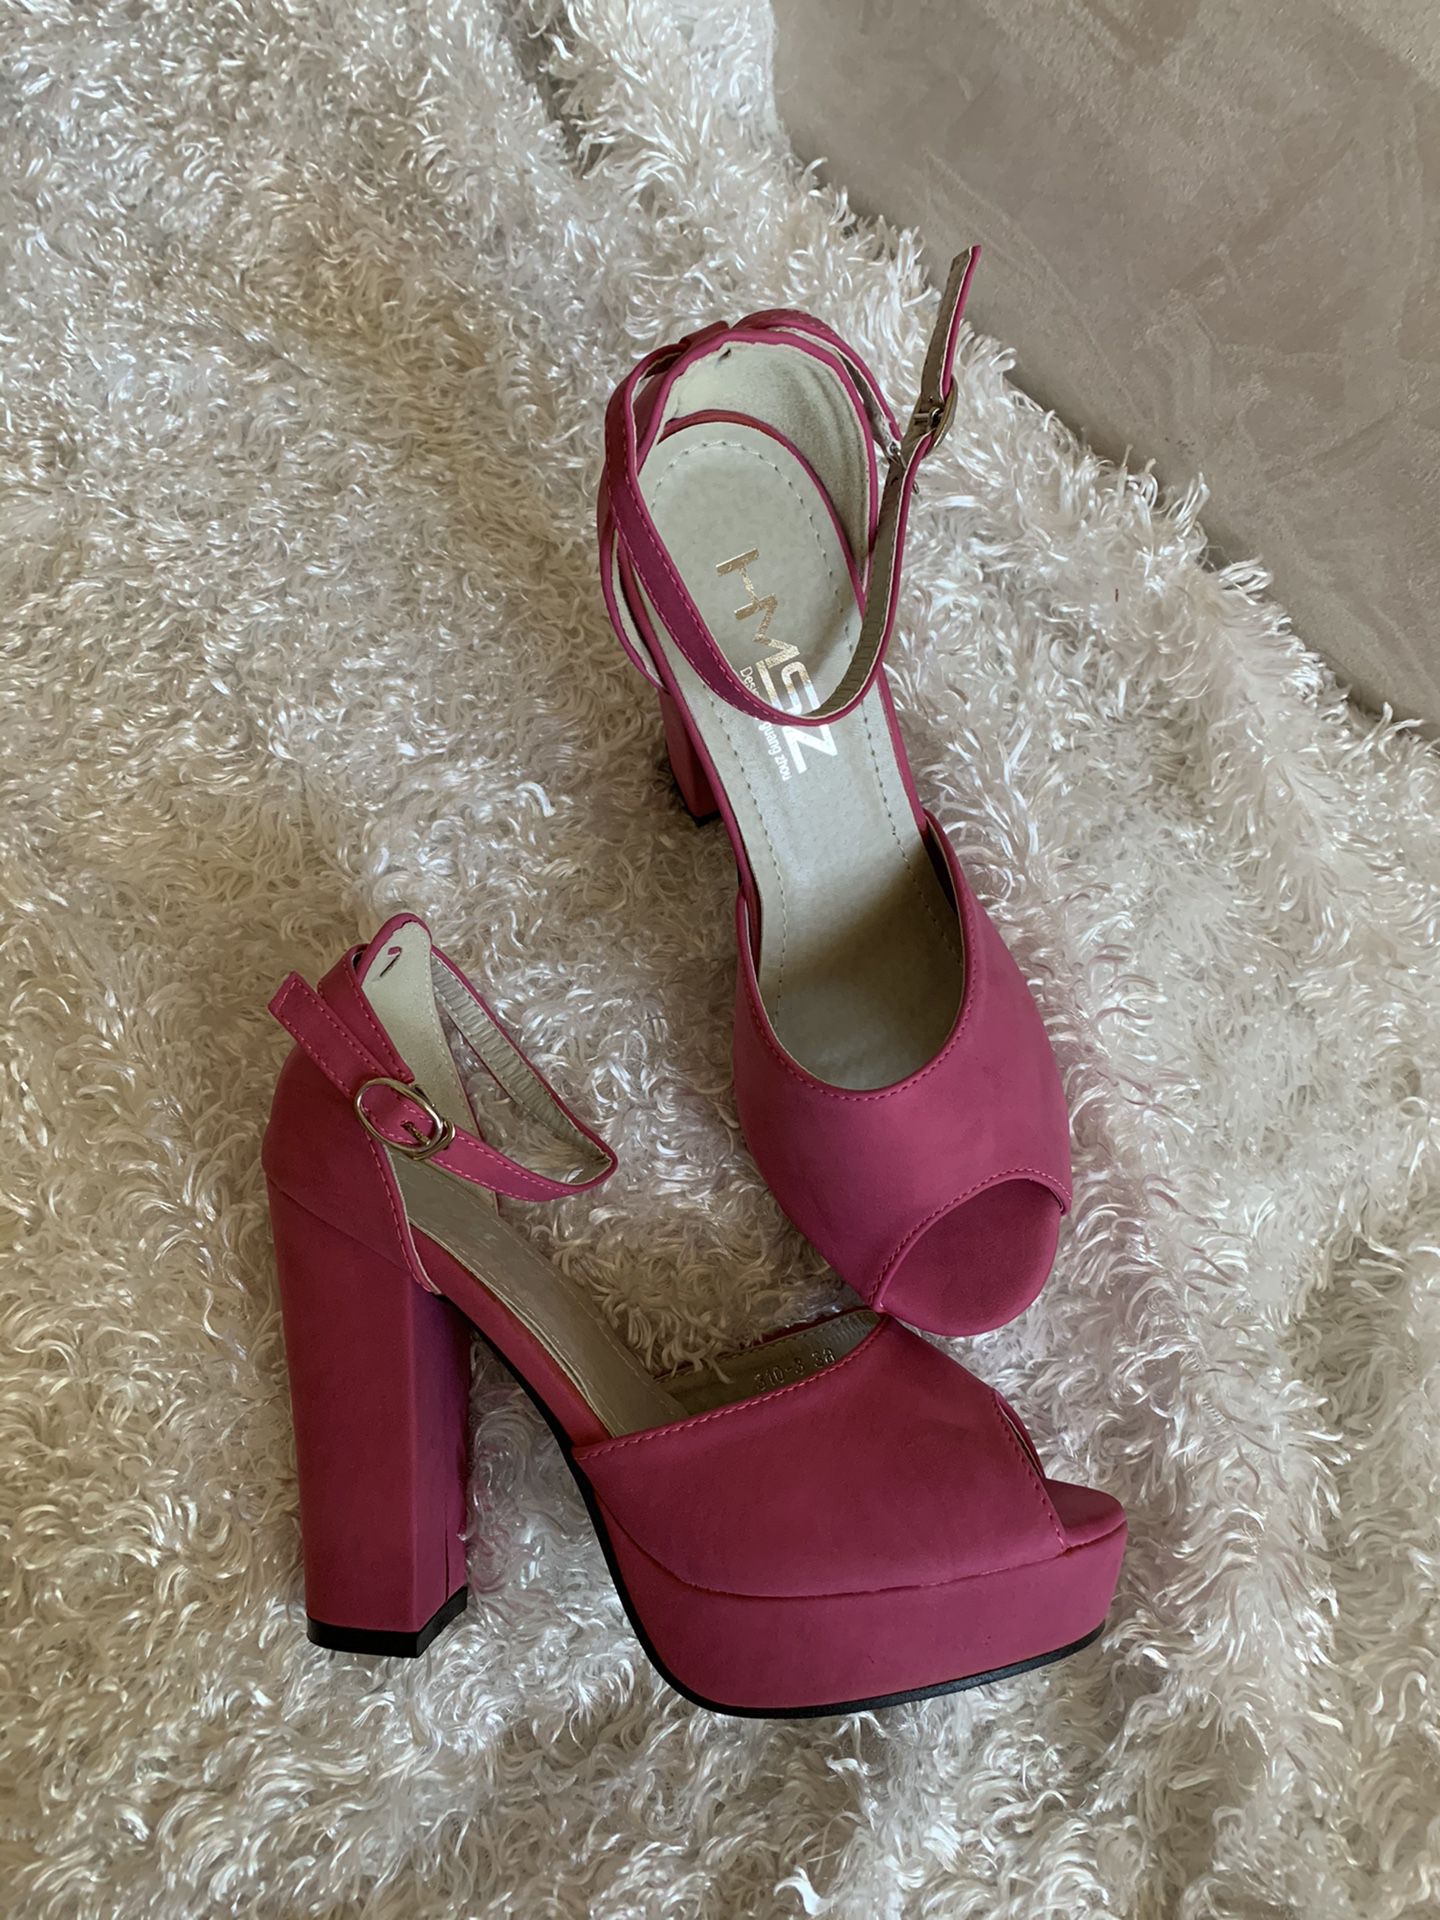 New hot pink high heels size 7.5